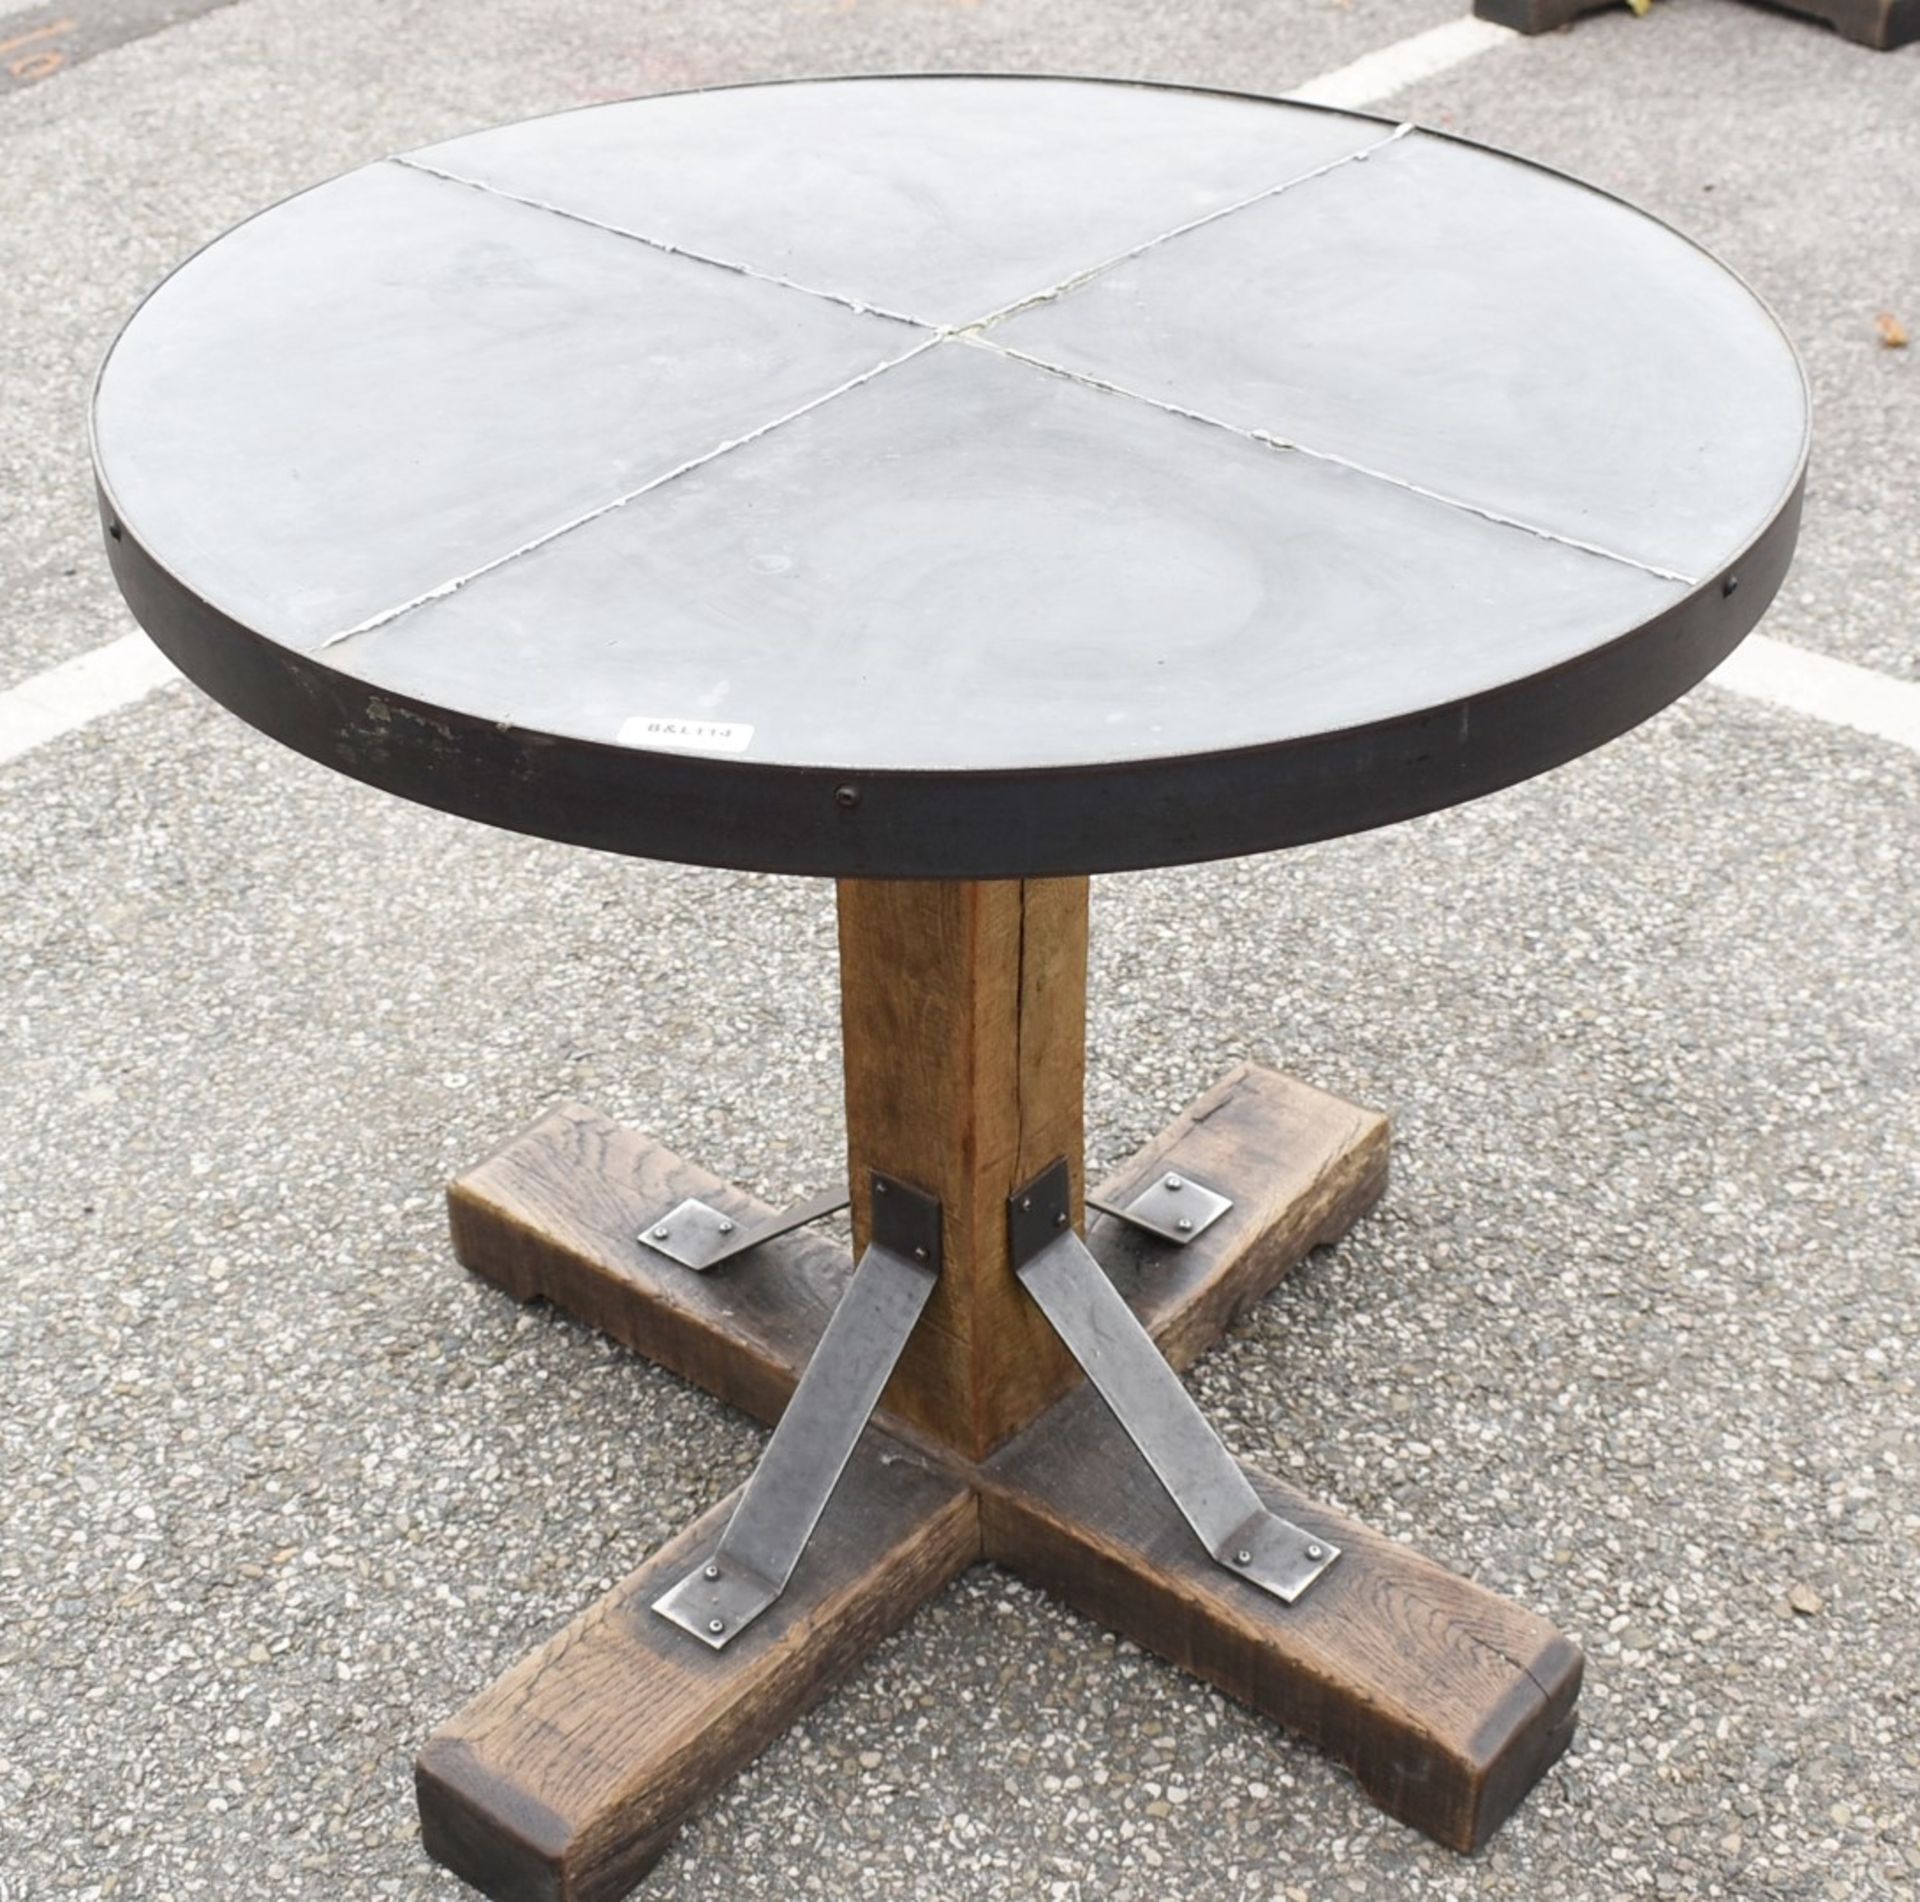 1 x Industrial 80cm Restaurant Table - Stone Style Top With Steel Edging and a Rustic Timber Base - Image 3 of 5